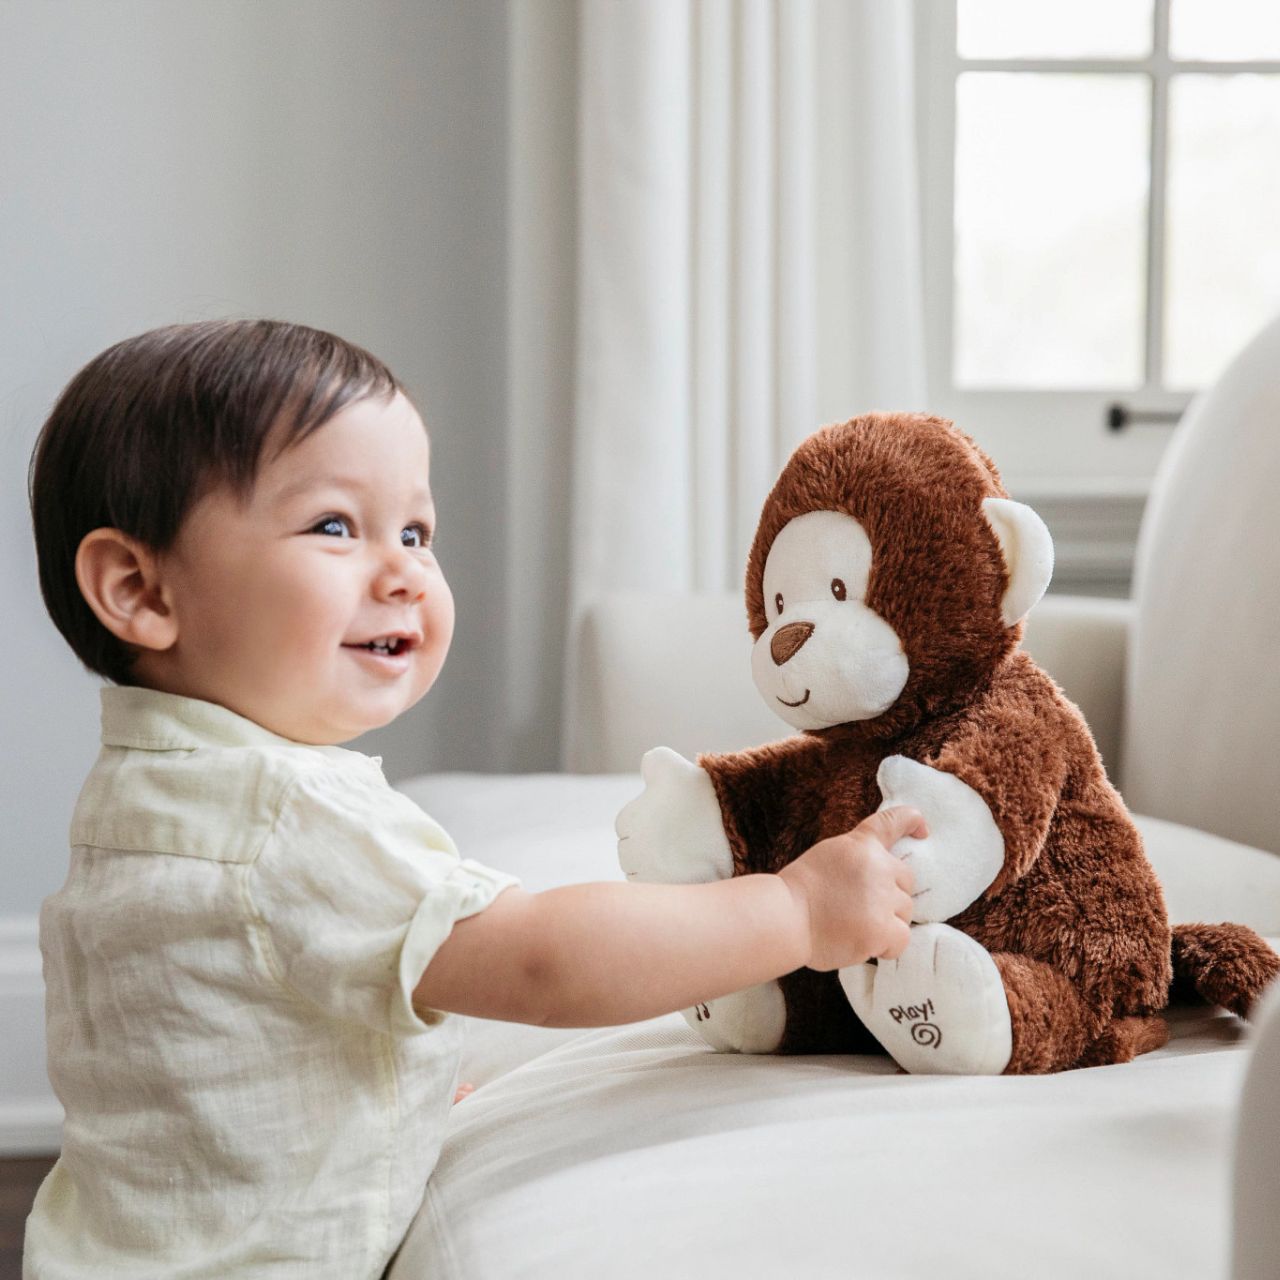 GUND Clappy The Animated Monkey  Hello, baby, Clappy is an enthusiastic monkey with two different play modes. Press the left foot to play an interactive clapping game, and the right to hear the song "If You're Happy and You Know It" in a cute child's voice.